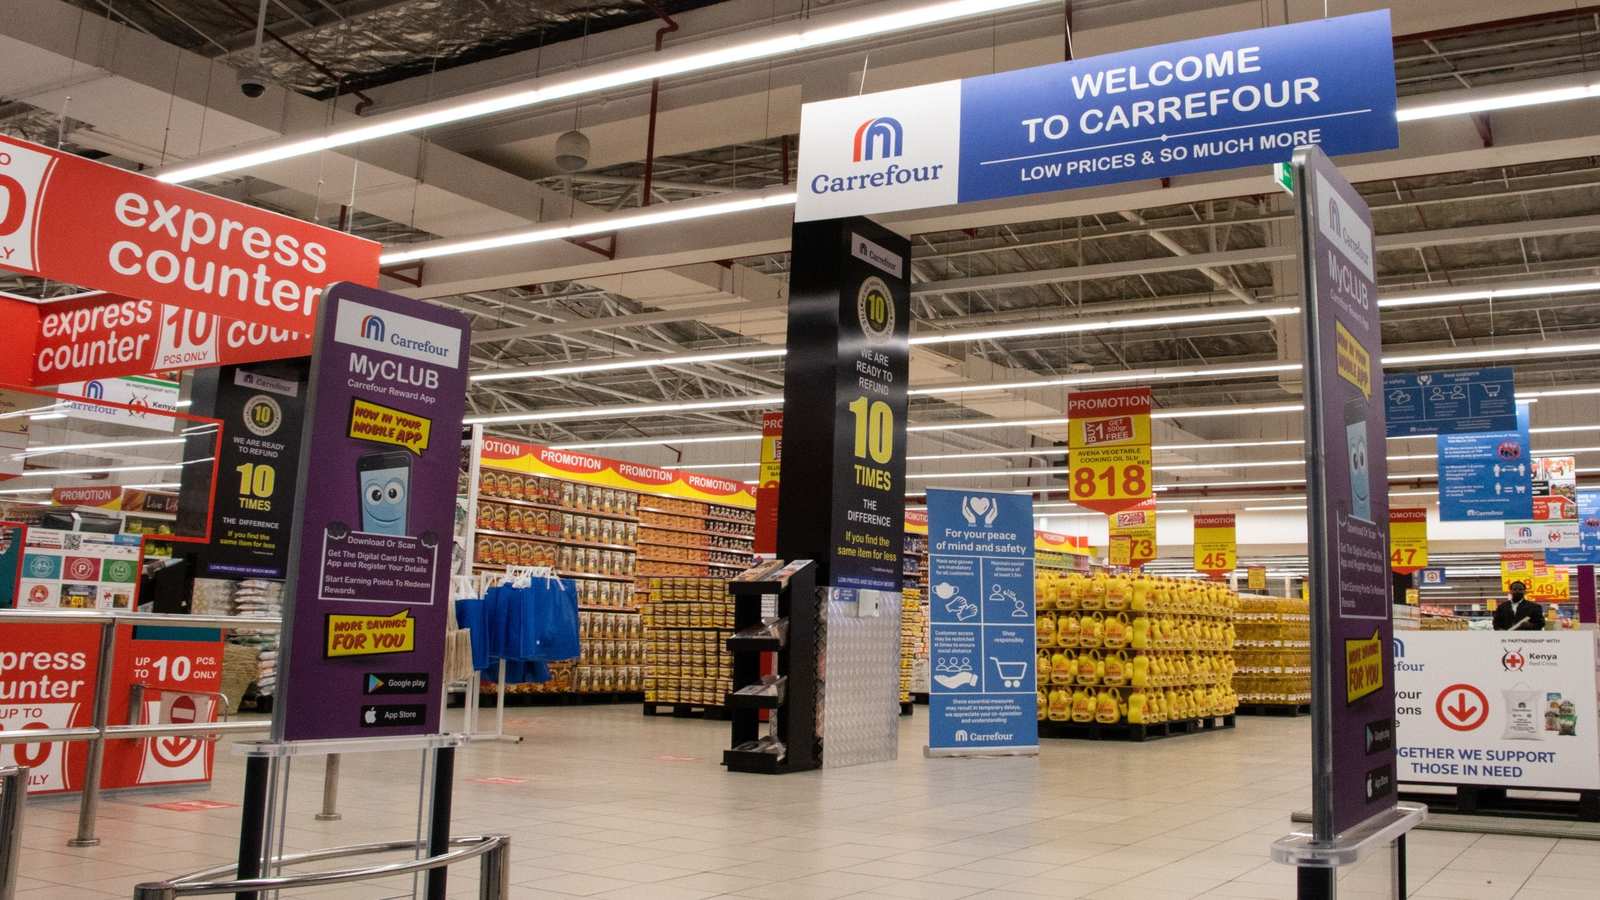 Carrefour Kenya accelerates its expansion, taking over spaces formerly occupied by struggling retailers